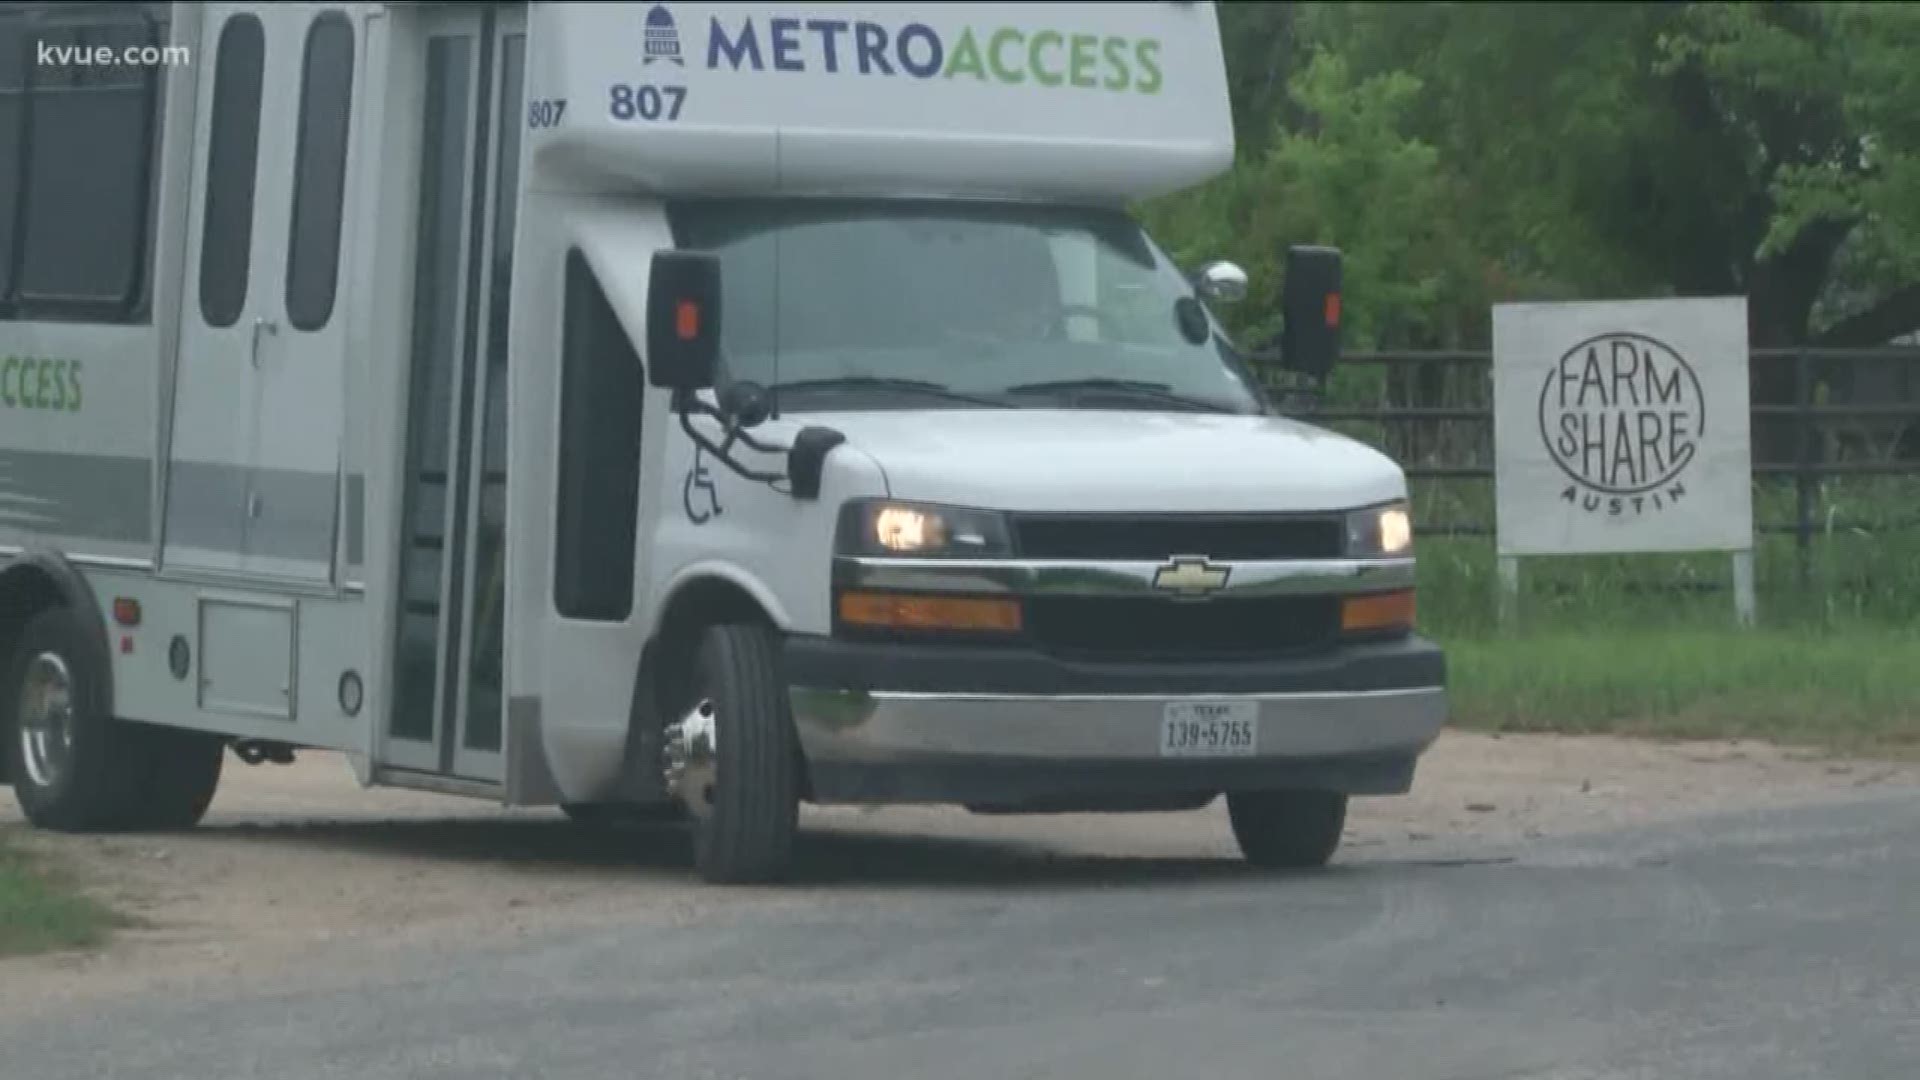 Hannah Rucker shows us how farmers are teaming up with Capital Metro for some special deliveries.